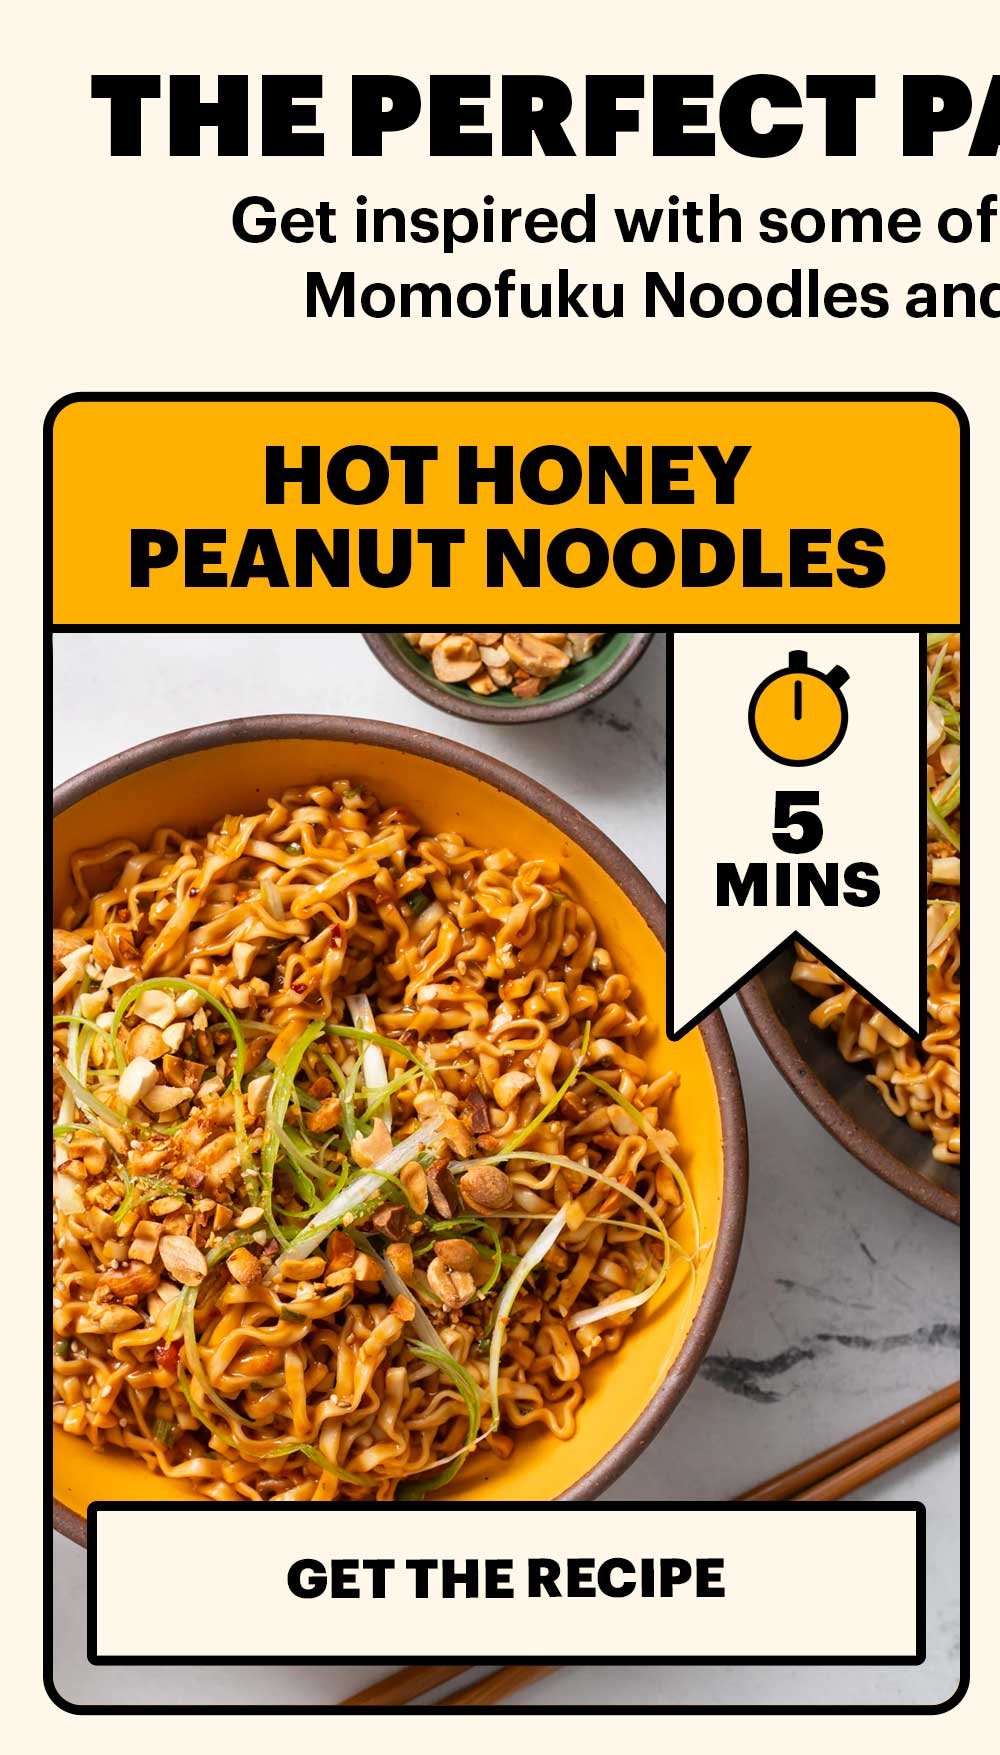 THE PERFECT PAIRING AT PLAY. Get inspired with some of our easy recipes that pair Momofuku Noodles and Chili Crunch together. HOT HONEY PEANUT NOODLES. 5 MINS. GET THE RECIPE